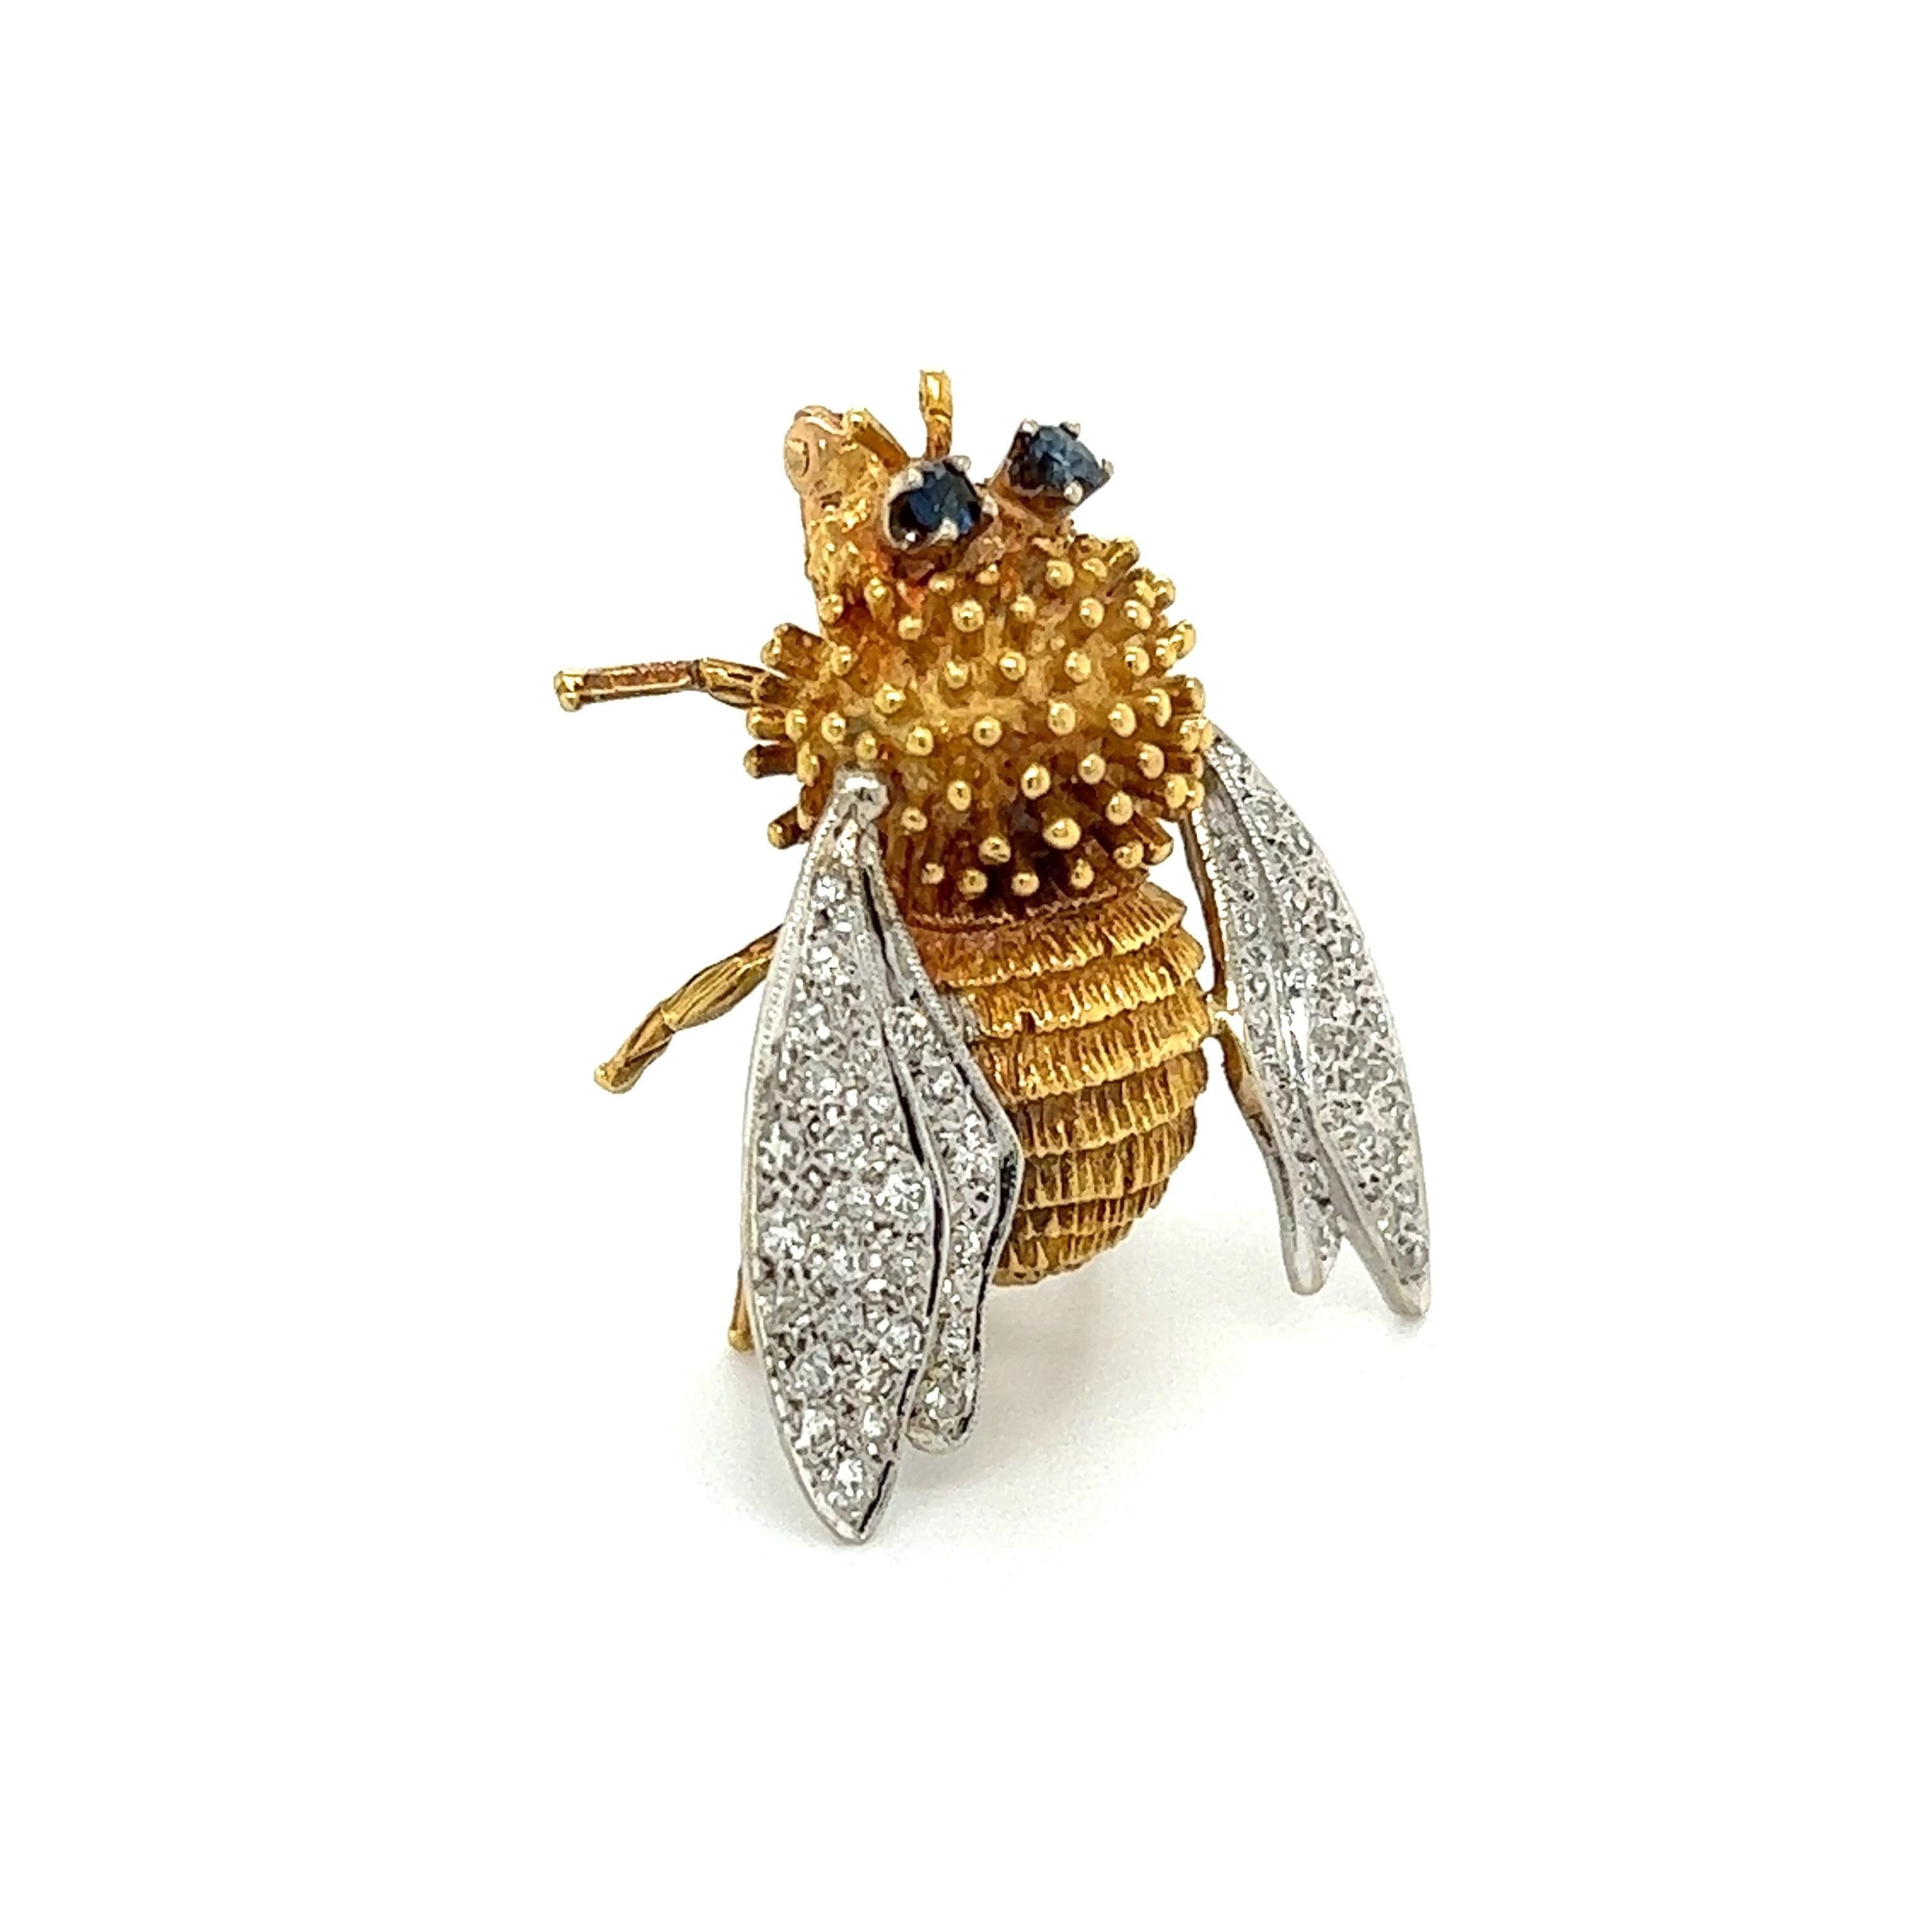 Simply Beautiful! Stylish finely detailed Diamond Bee with Sapphire Eyes Gold Brooch. Hand pave set with 52 round Diamond on wings, weighing approx. 0.70tcw and vivid blue Sapphire eyes, approx. 0.16tcw. Hand crafted in 18 Karat 2-Tone yellow Gold.